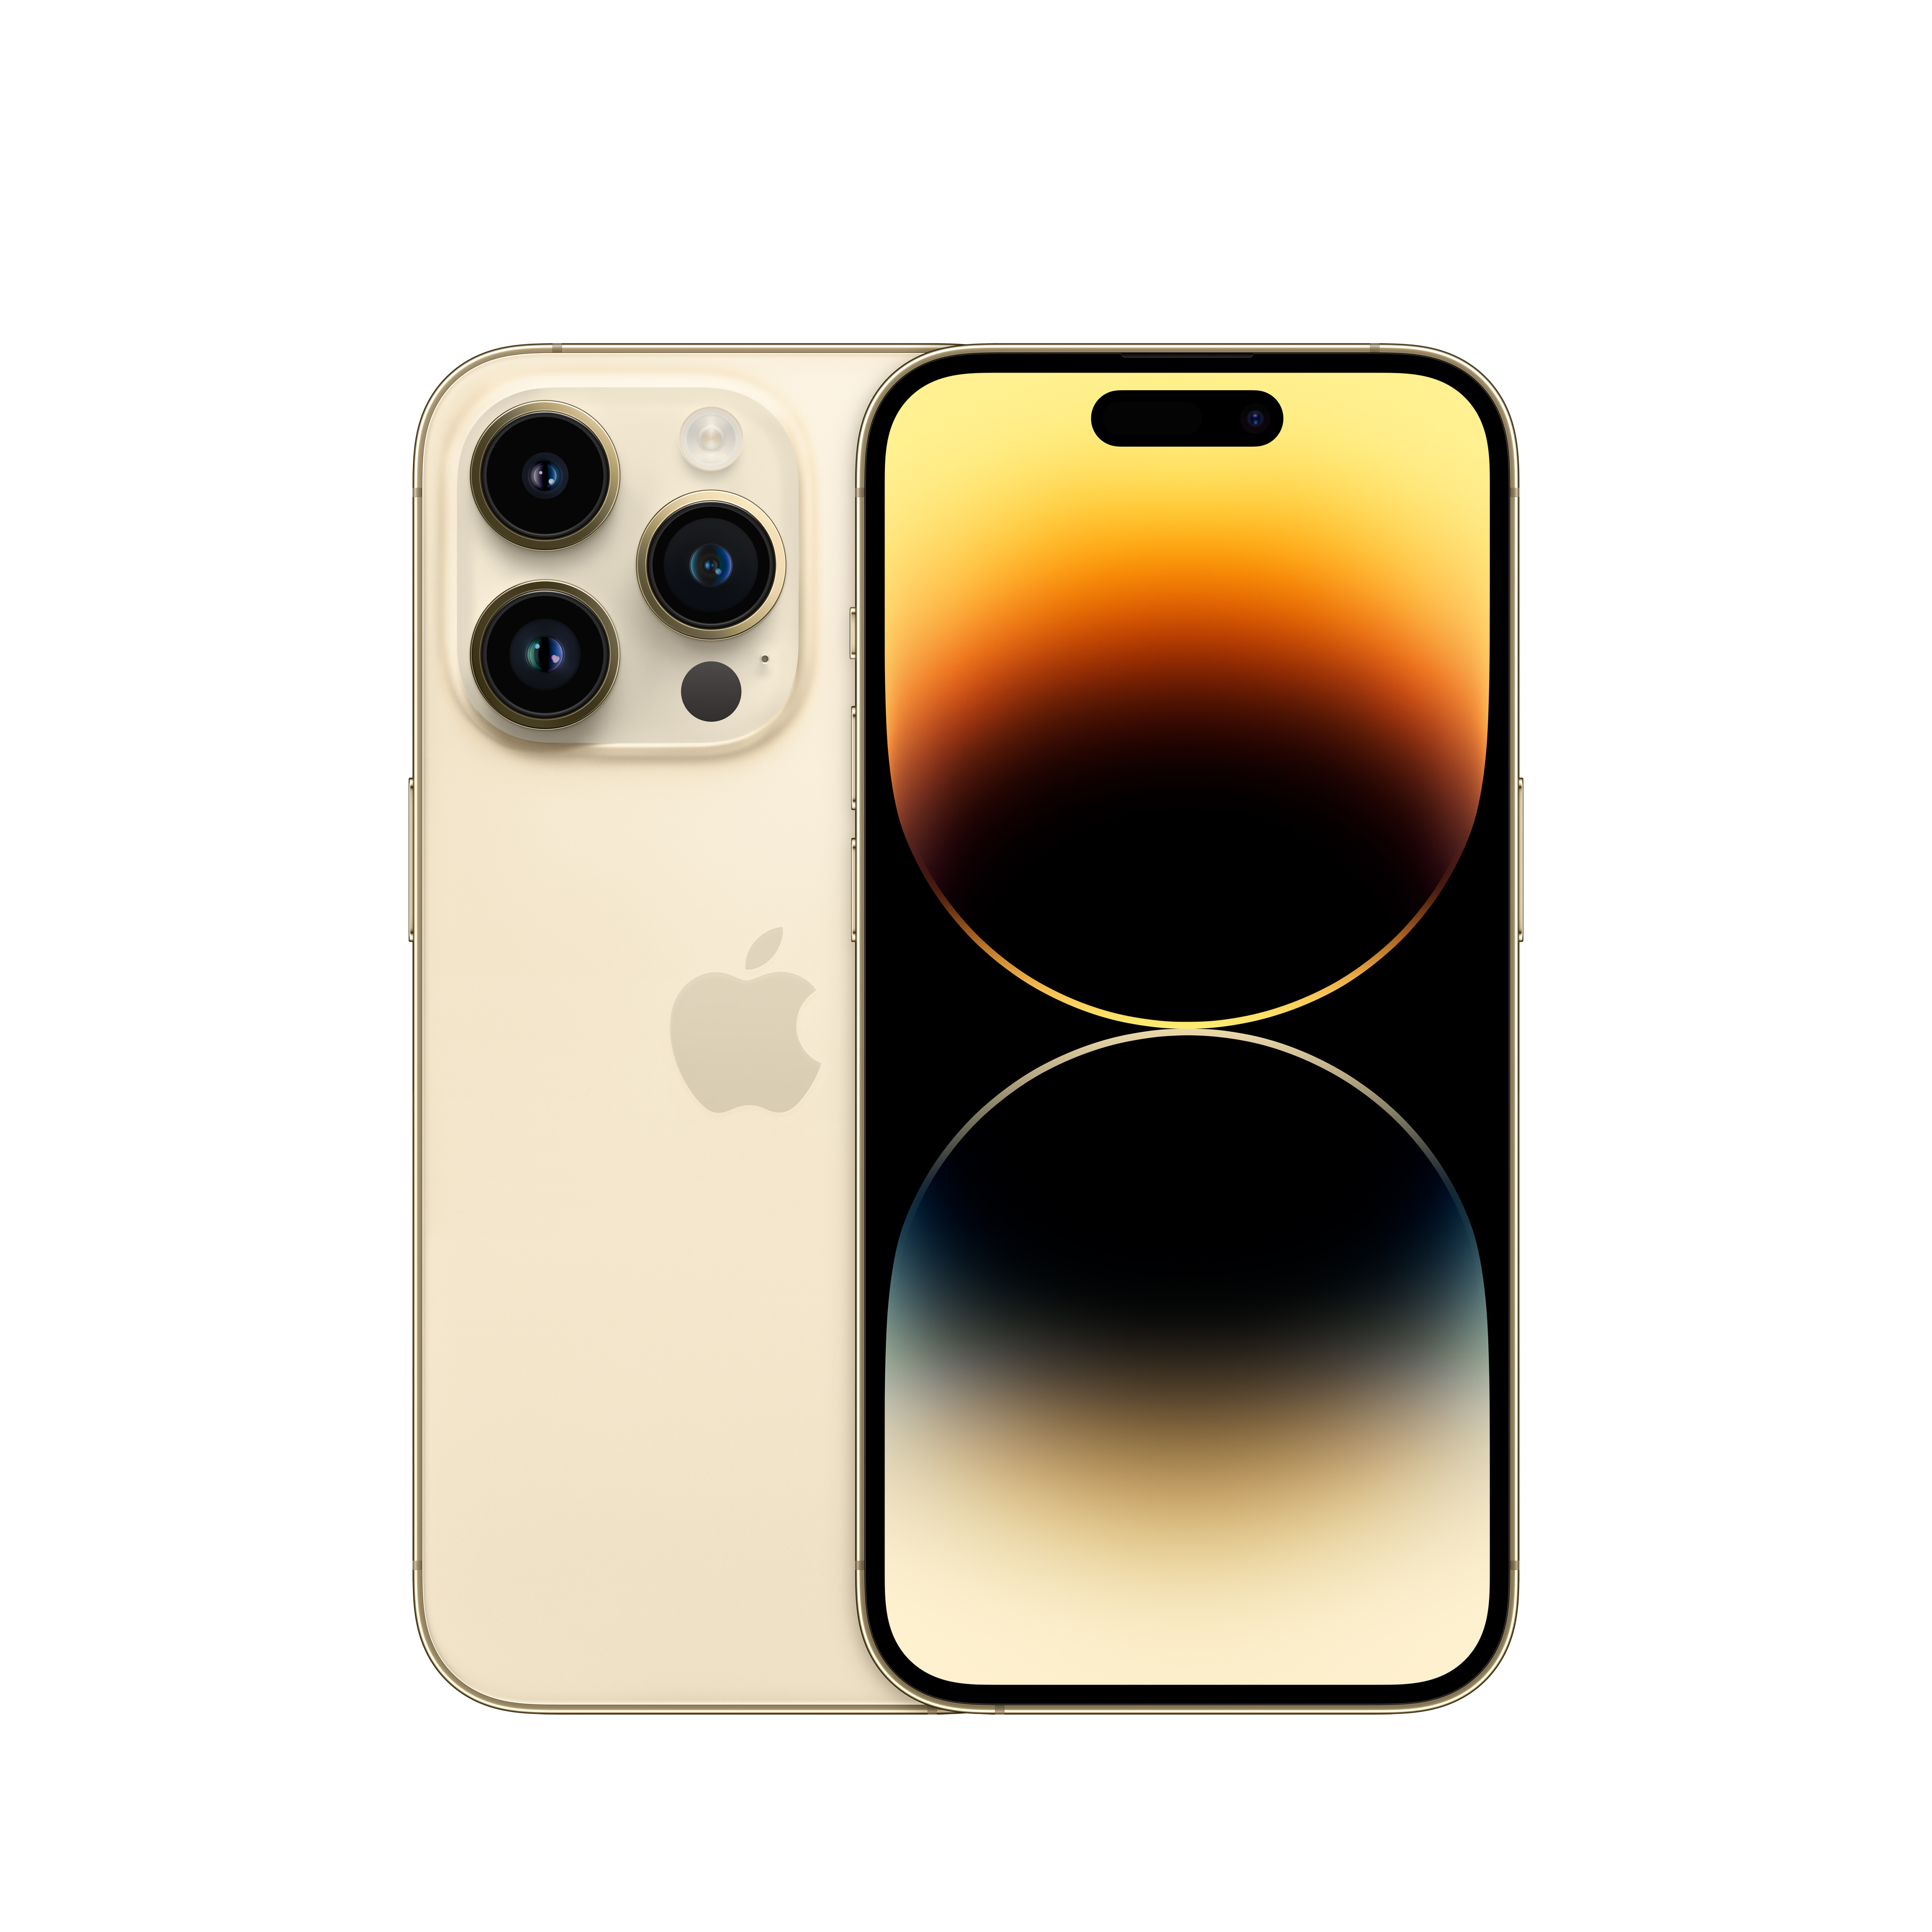 Apple iPhone 14 Pro (MQ183HN/A) Gold with 256GB, iOS 16, A15 Bionic chip, 6core CPU with 2 performance, 6.1 inch OLED display